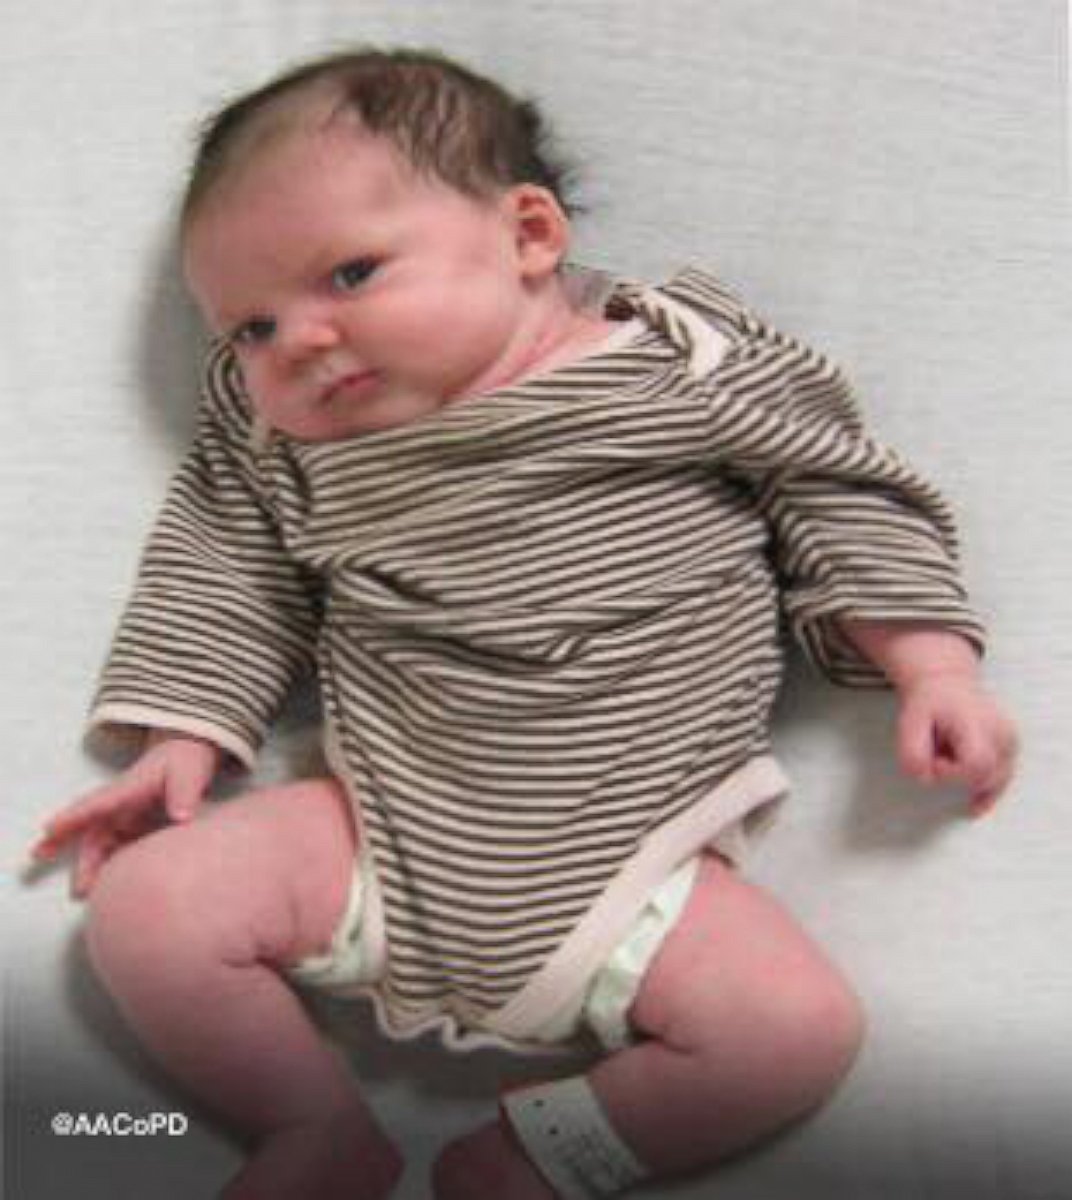 PHOTO: Anyone with information about this baby found abandoned in Maryland is asked to call the Anne Arundel County Police Department at 410-222-6145.